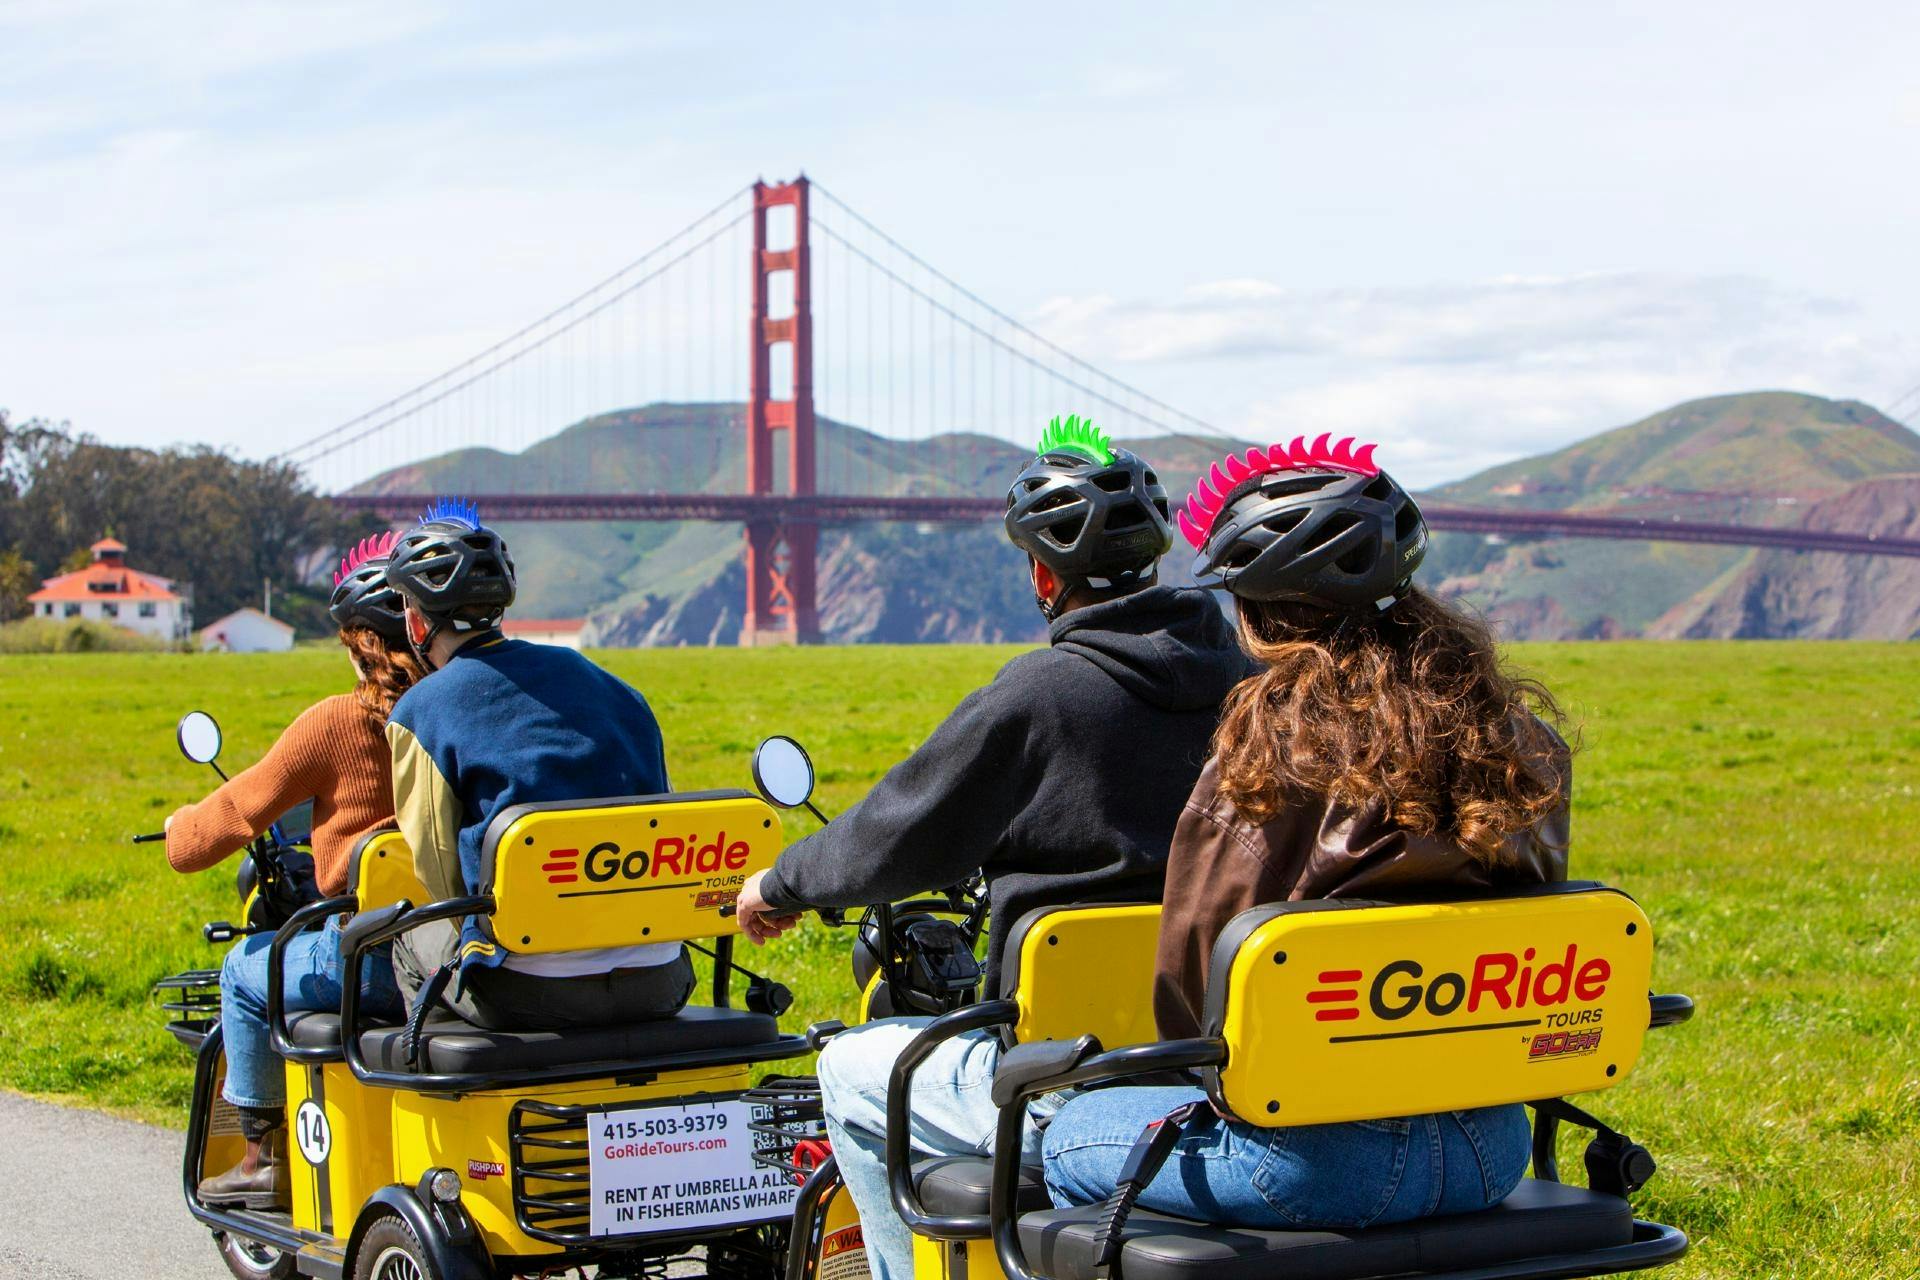 E-Scooter Rental with Audio Tour to Golden Gate Bridge Musement